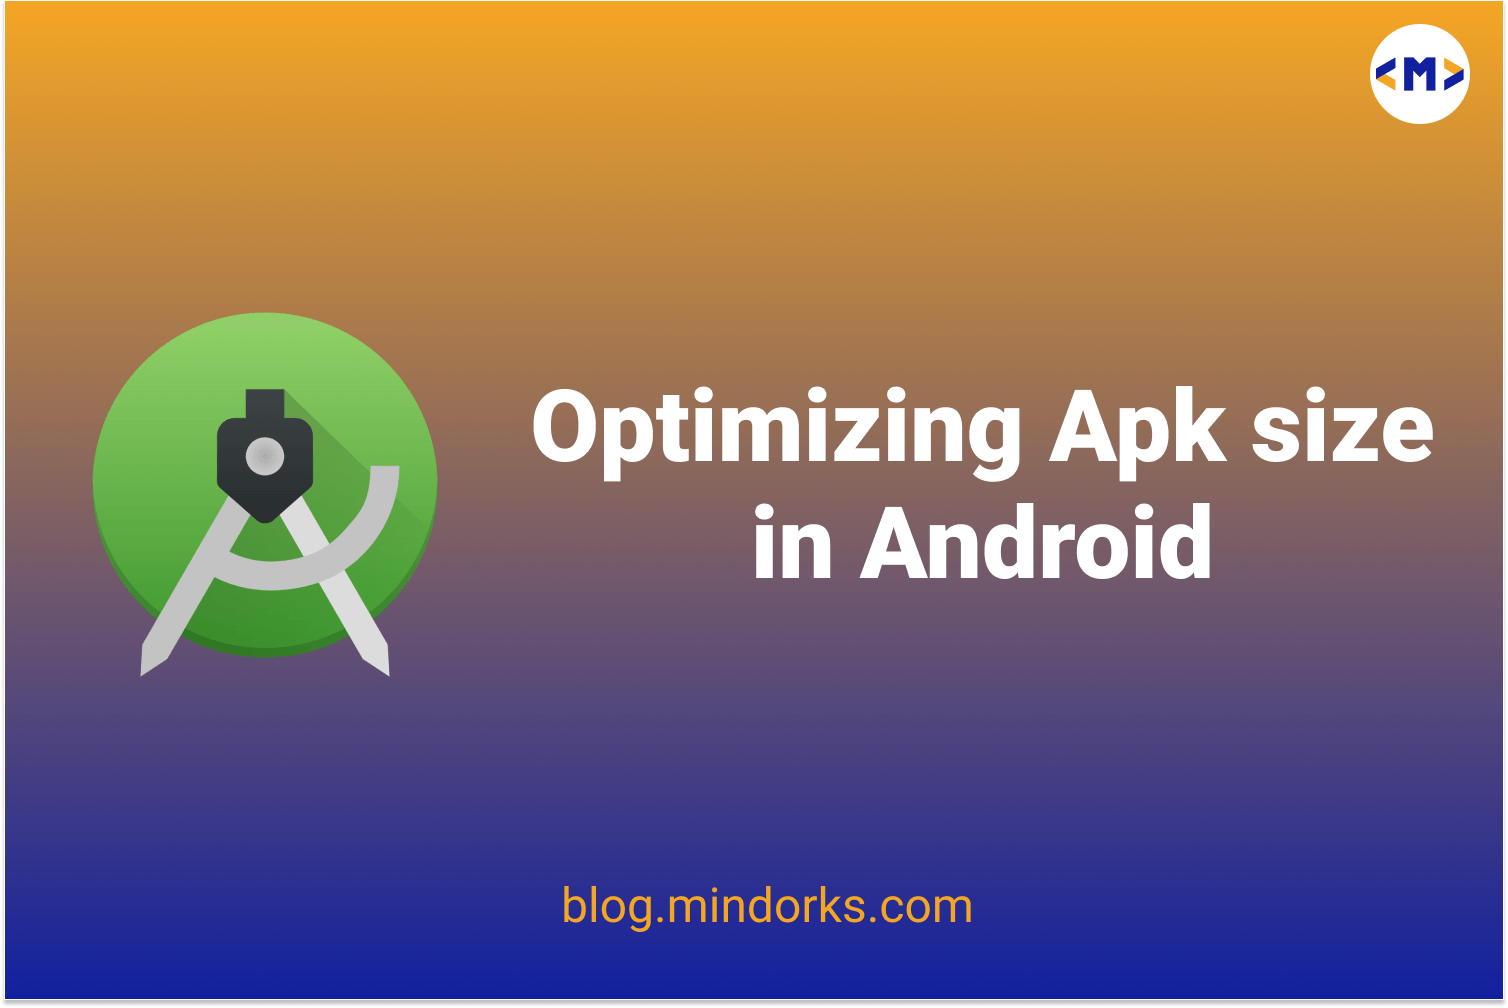 How to reduce APK size in Android?